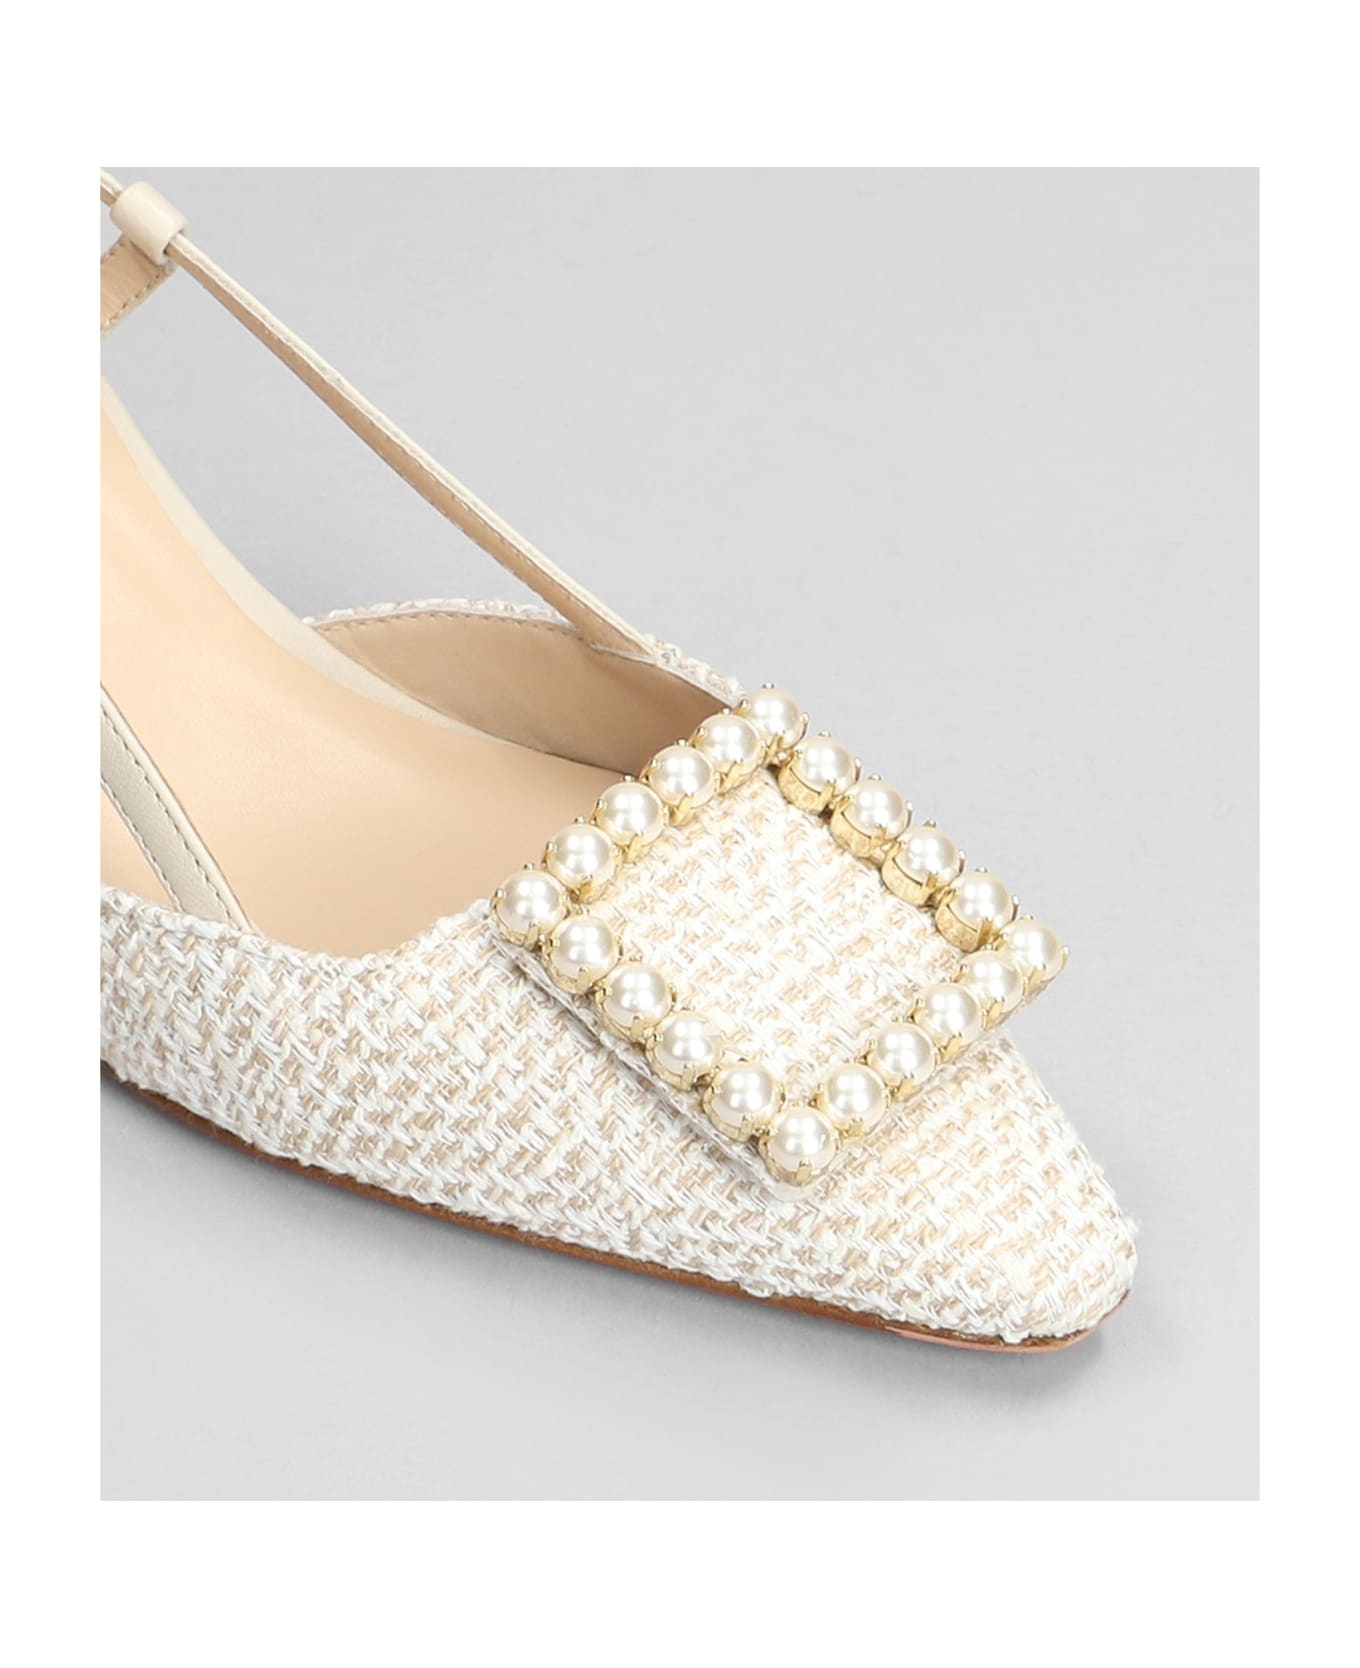 Roberto Festa Stefi Pumps In Beige Leather And Fabric - beige ハイヒール